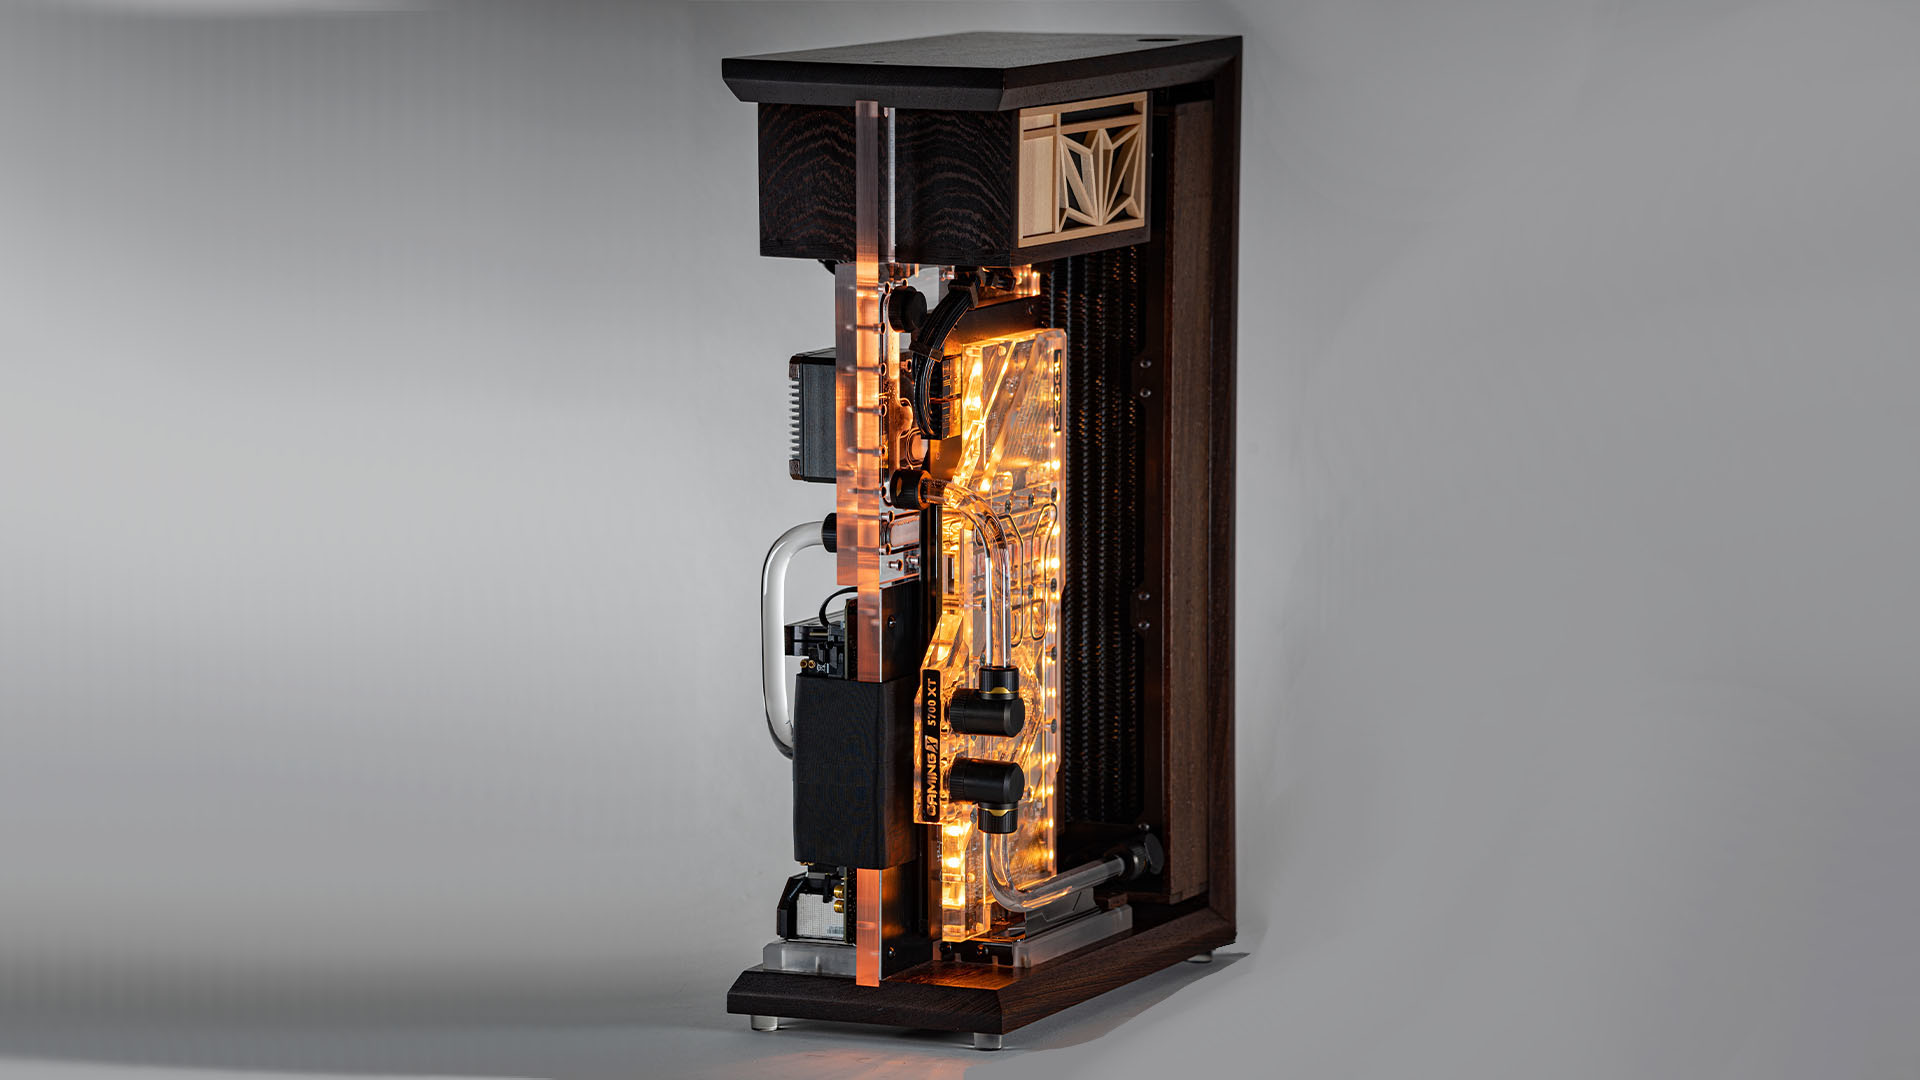 This Japanese-style wooden gaming PC is both beautiful and practical